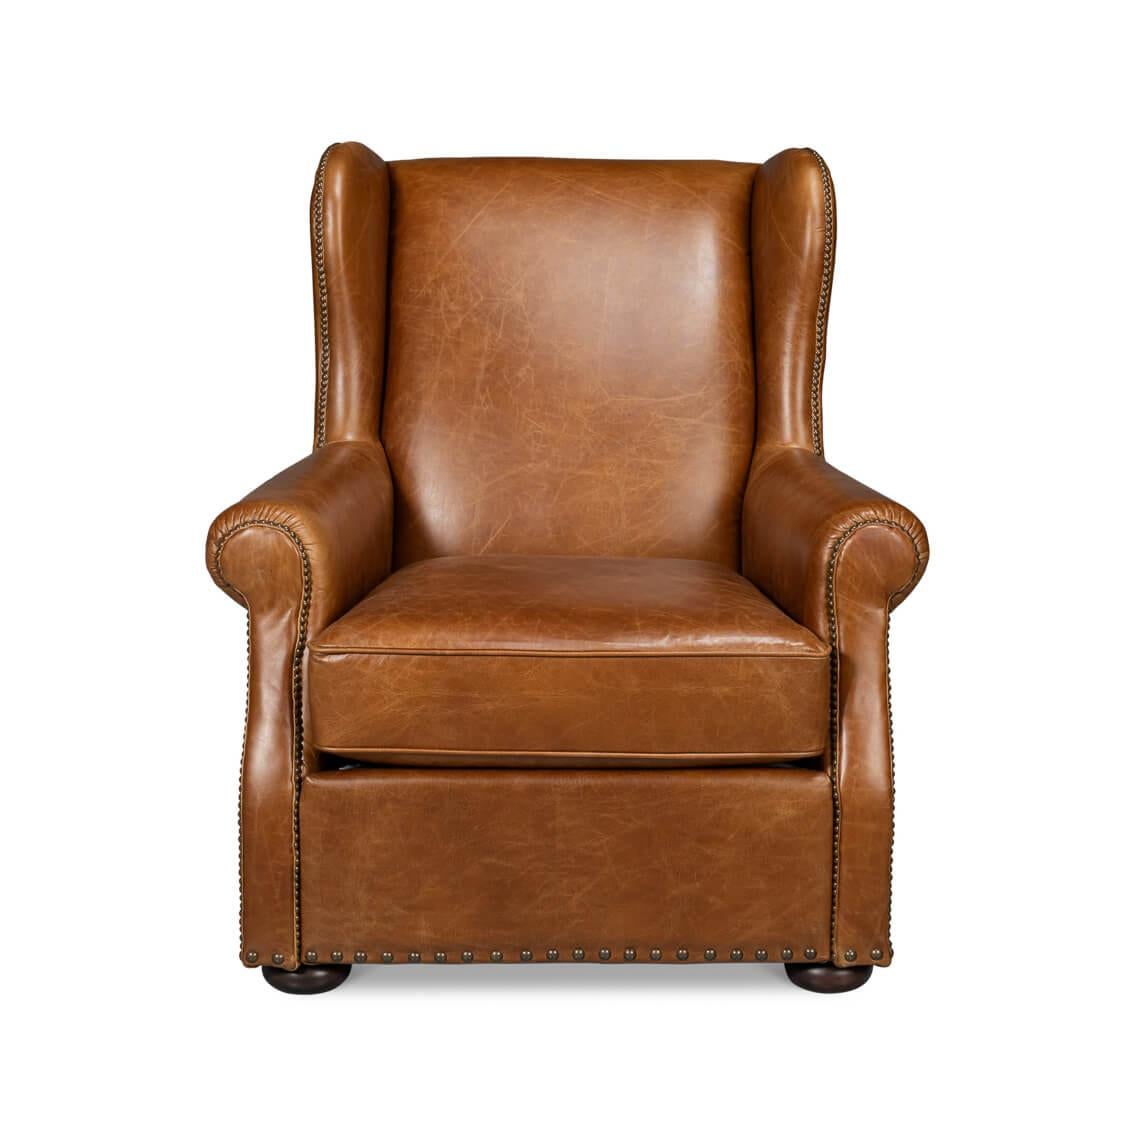 Featuring a high back design for ultimate support and rolled arms with intricate pleating detail, inviting you to a world of comfort with just one look. Wrapped in Cuba Brown leather, its deep color is the epitome of luxury, bound to add a touch of